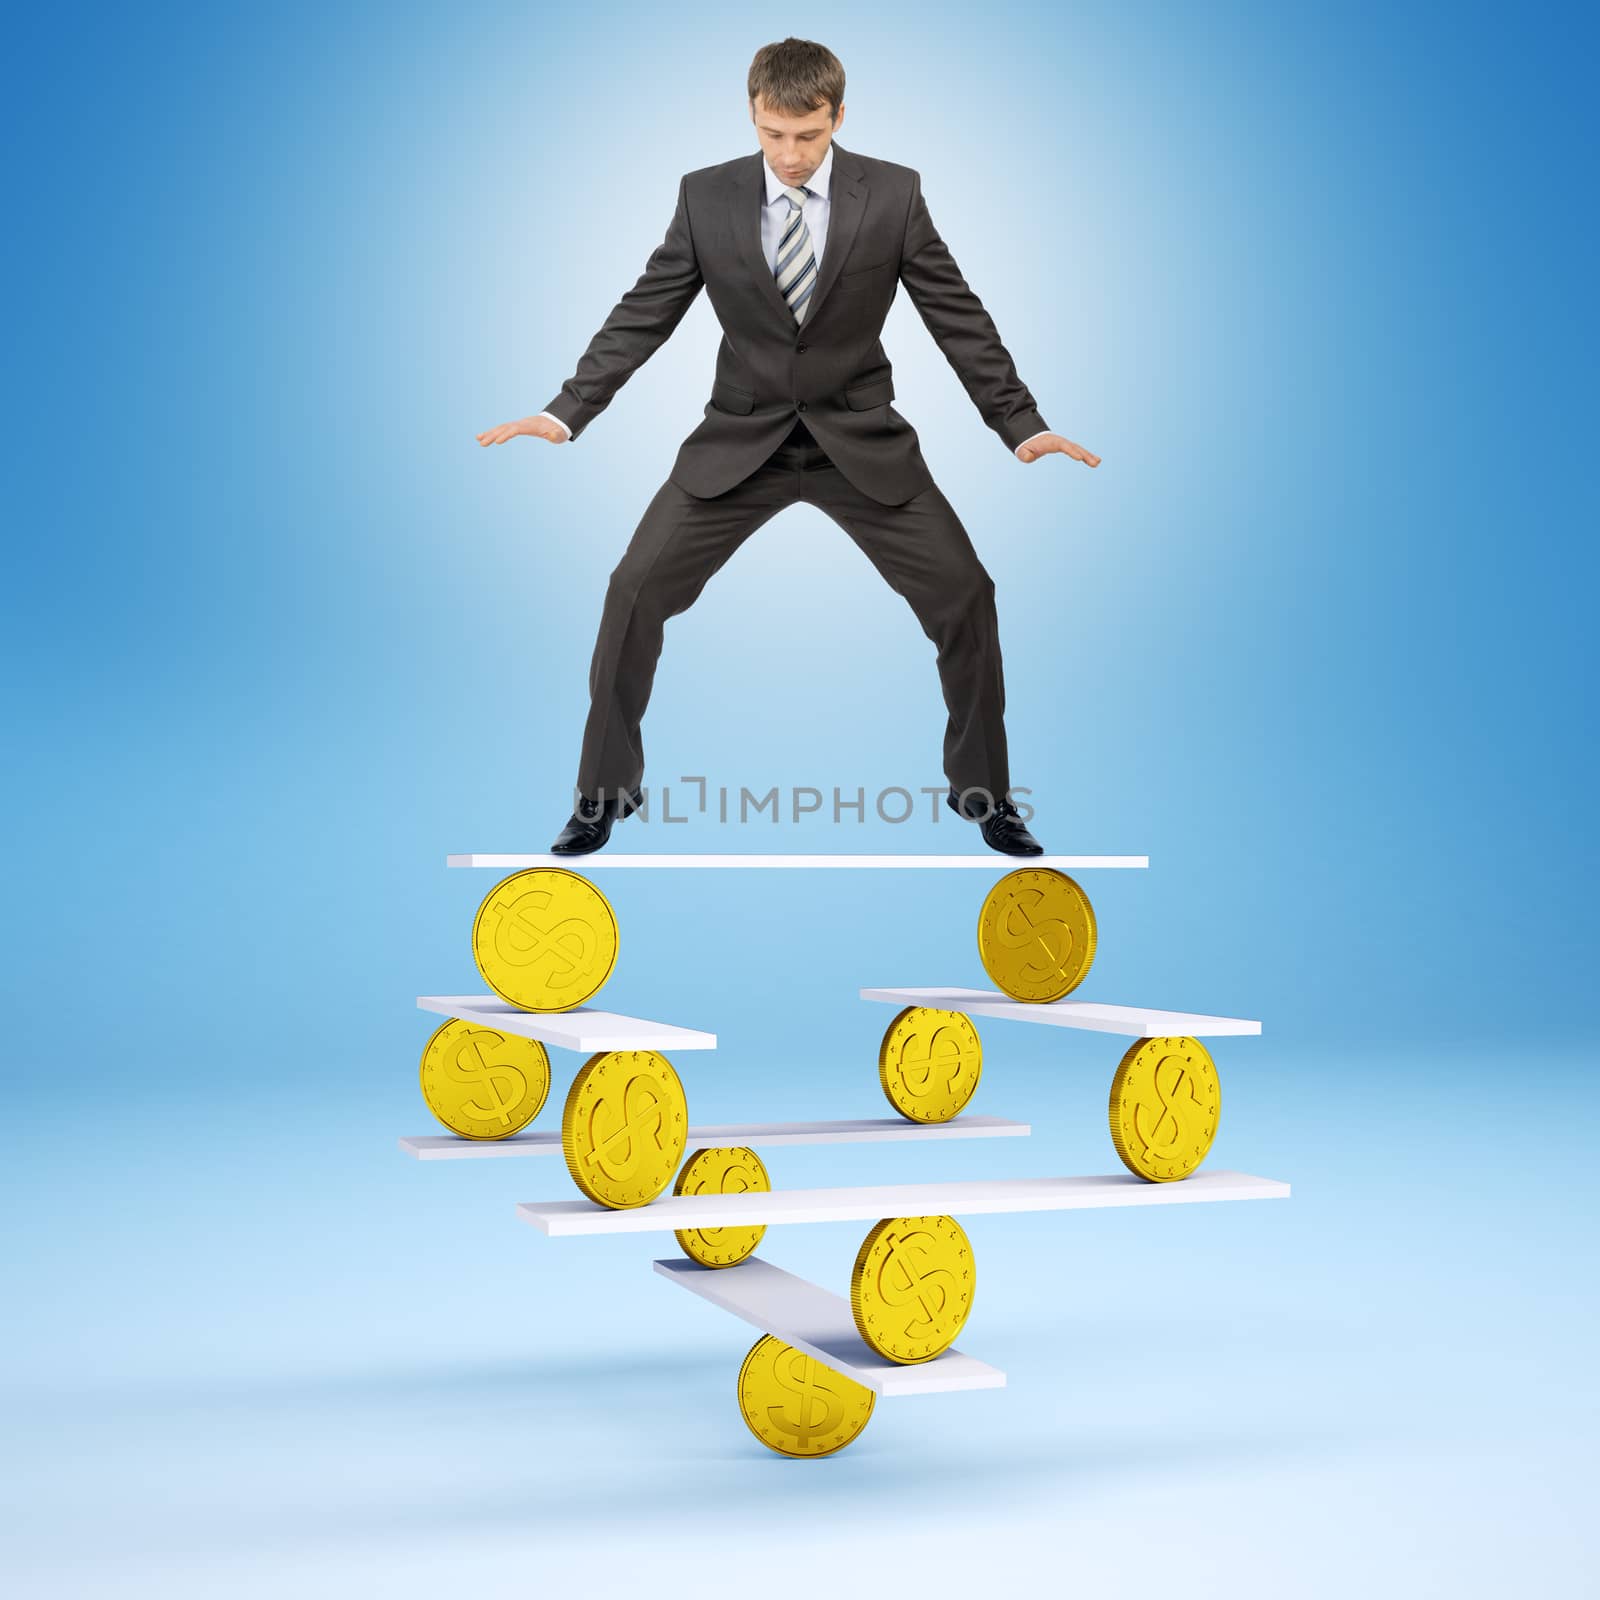 Businessman standing on balance with coins and looking down